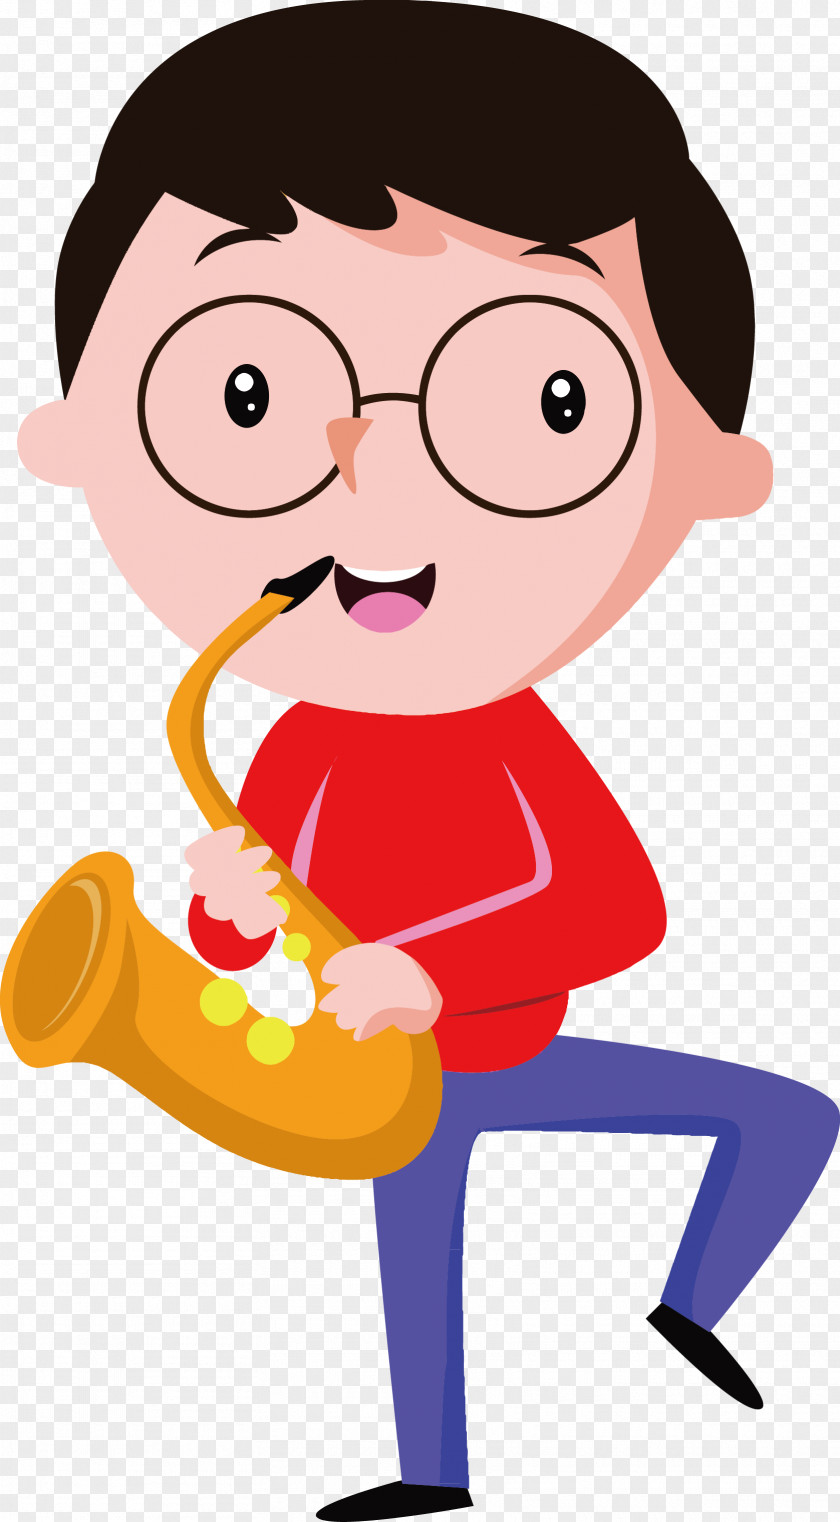 People Child Vector Decoration Musical Instrument Cartoon Illustration PNG